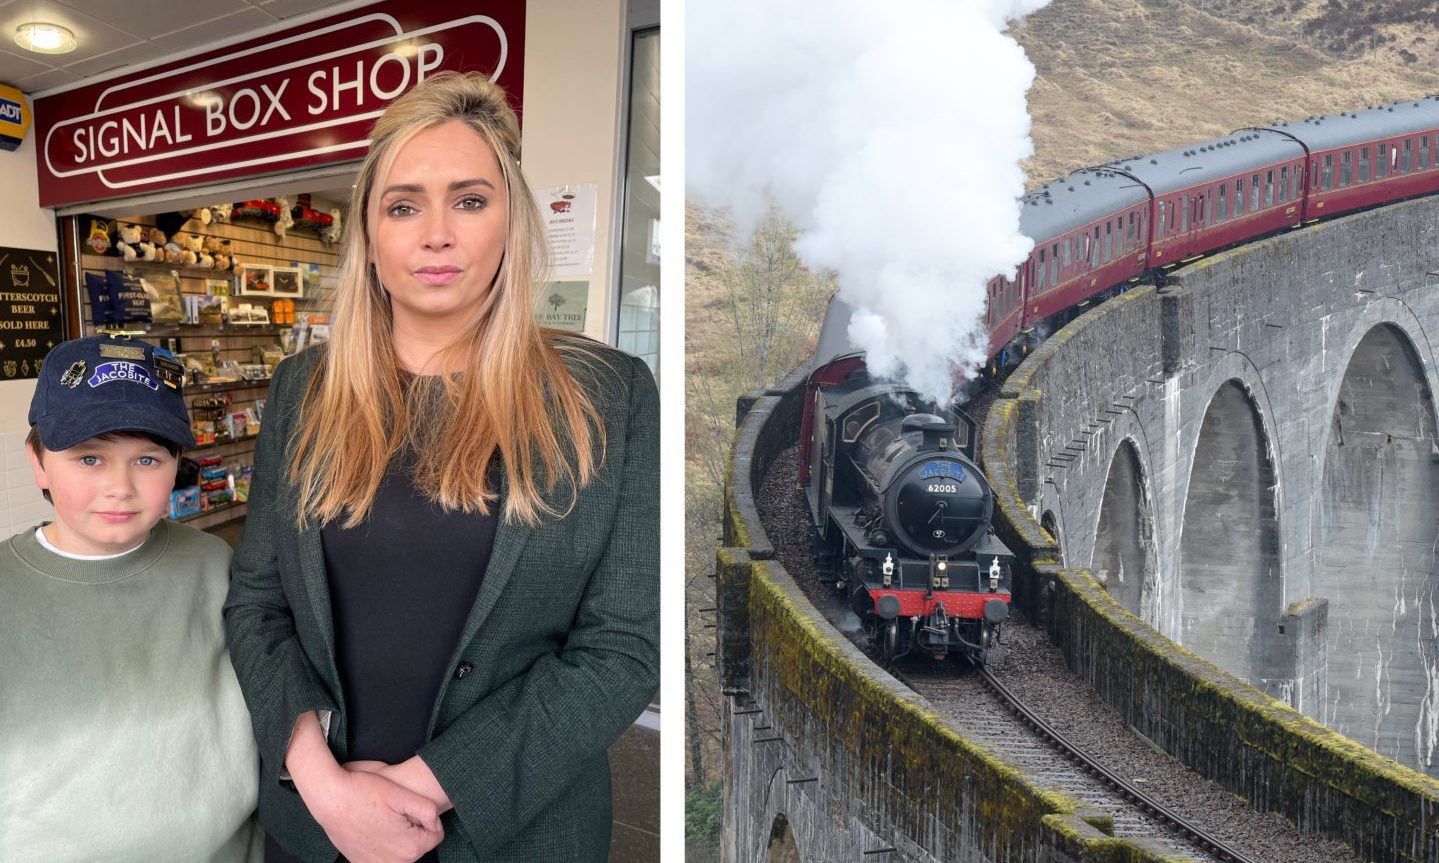 Highland shopkeeper fears for future as ‘Hogwarts Express’ train is suspended